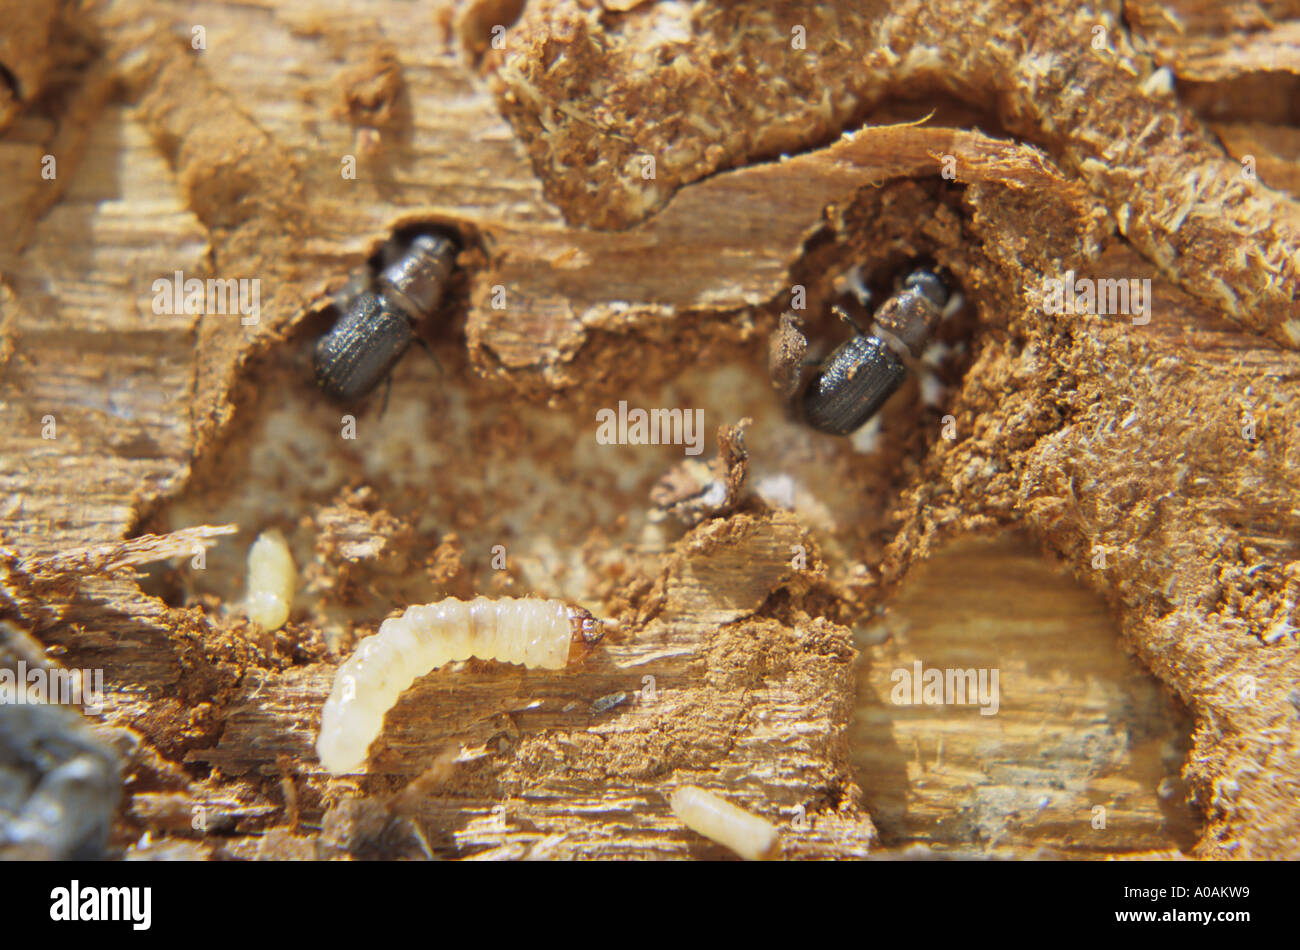 Mountain Pine Beetle larvae and adult in galleries under pine tree bark Smithers British Columbia Stock Photo